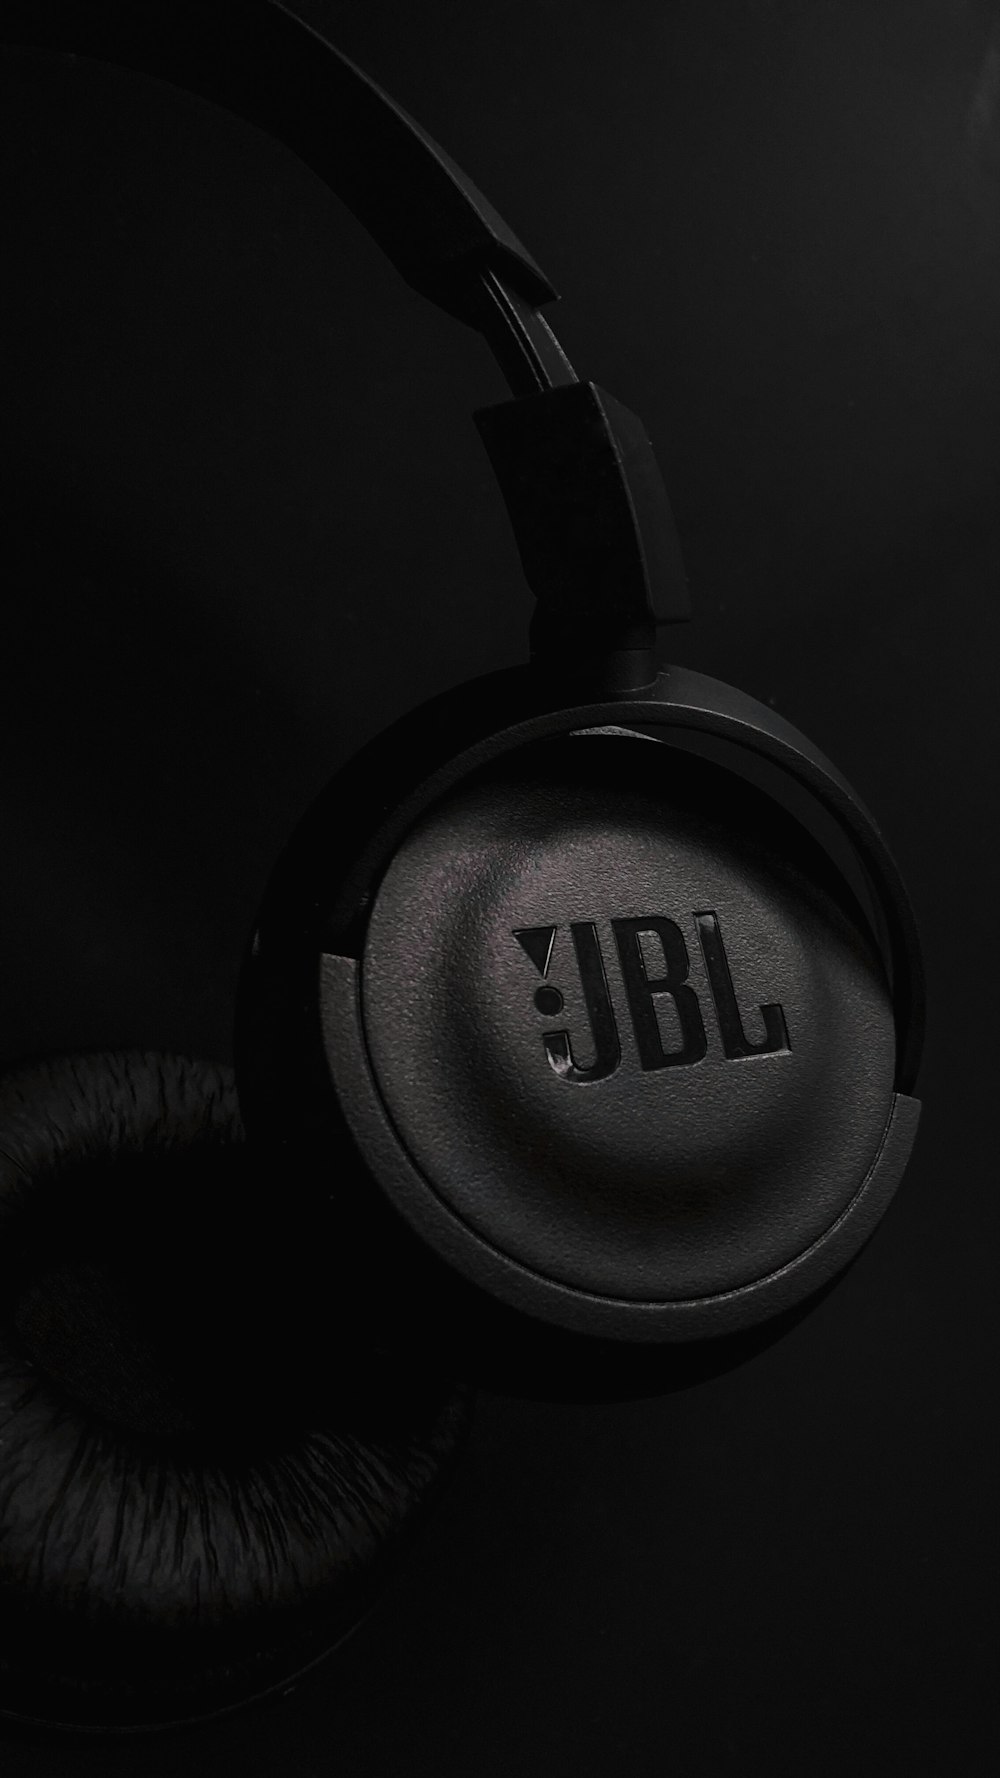 a pair of headphones with the jbl logo on it